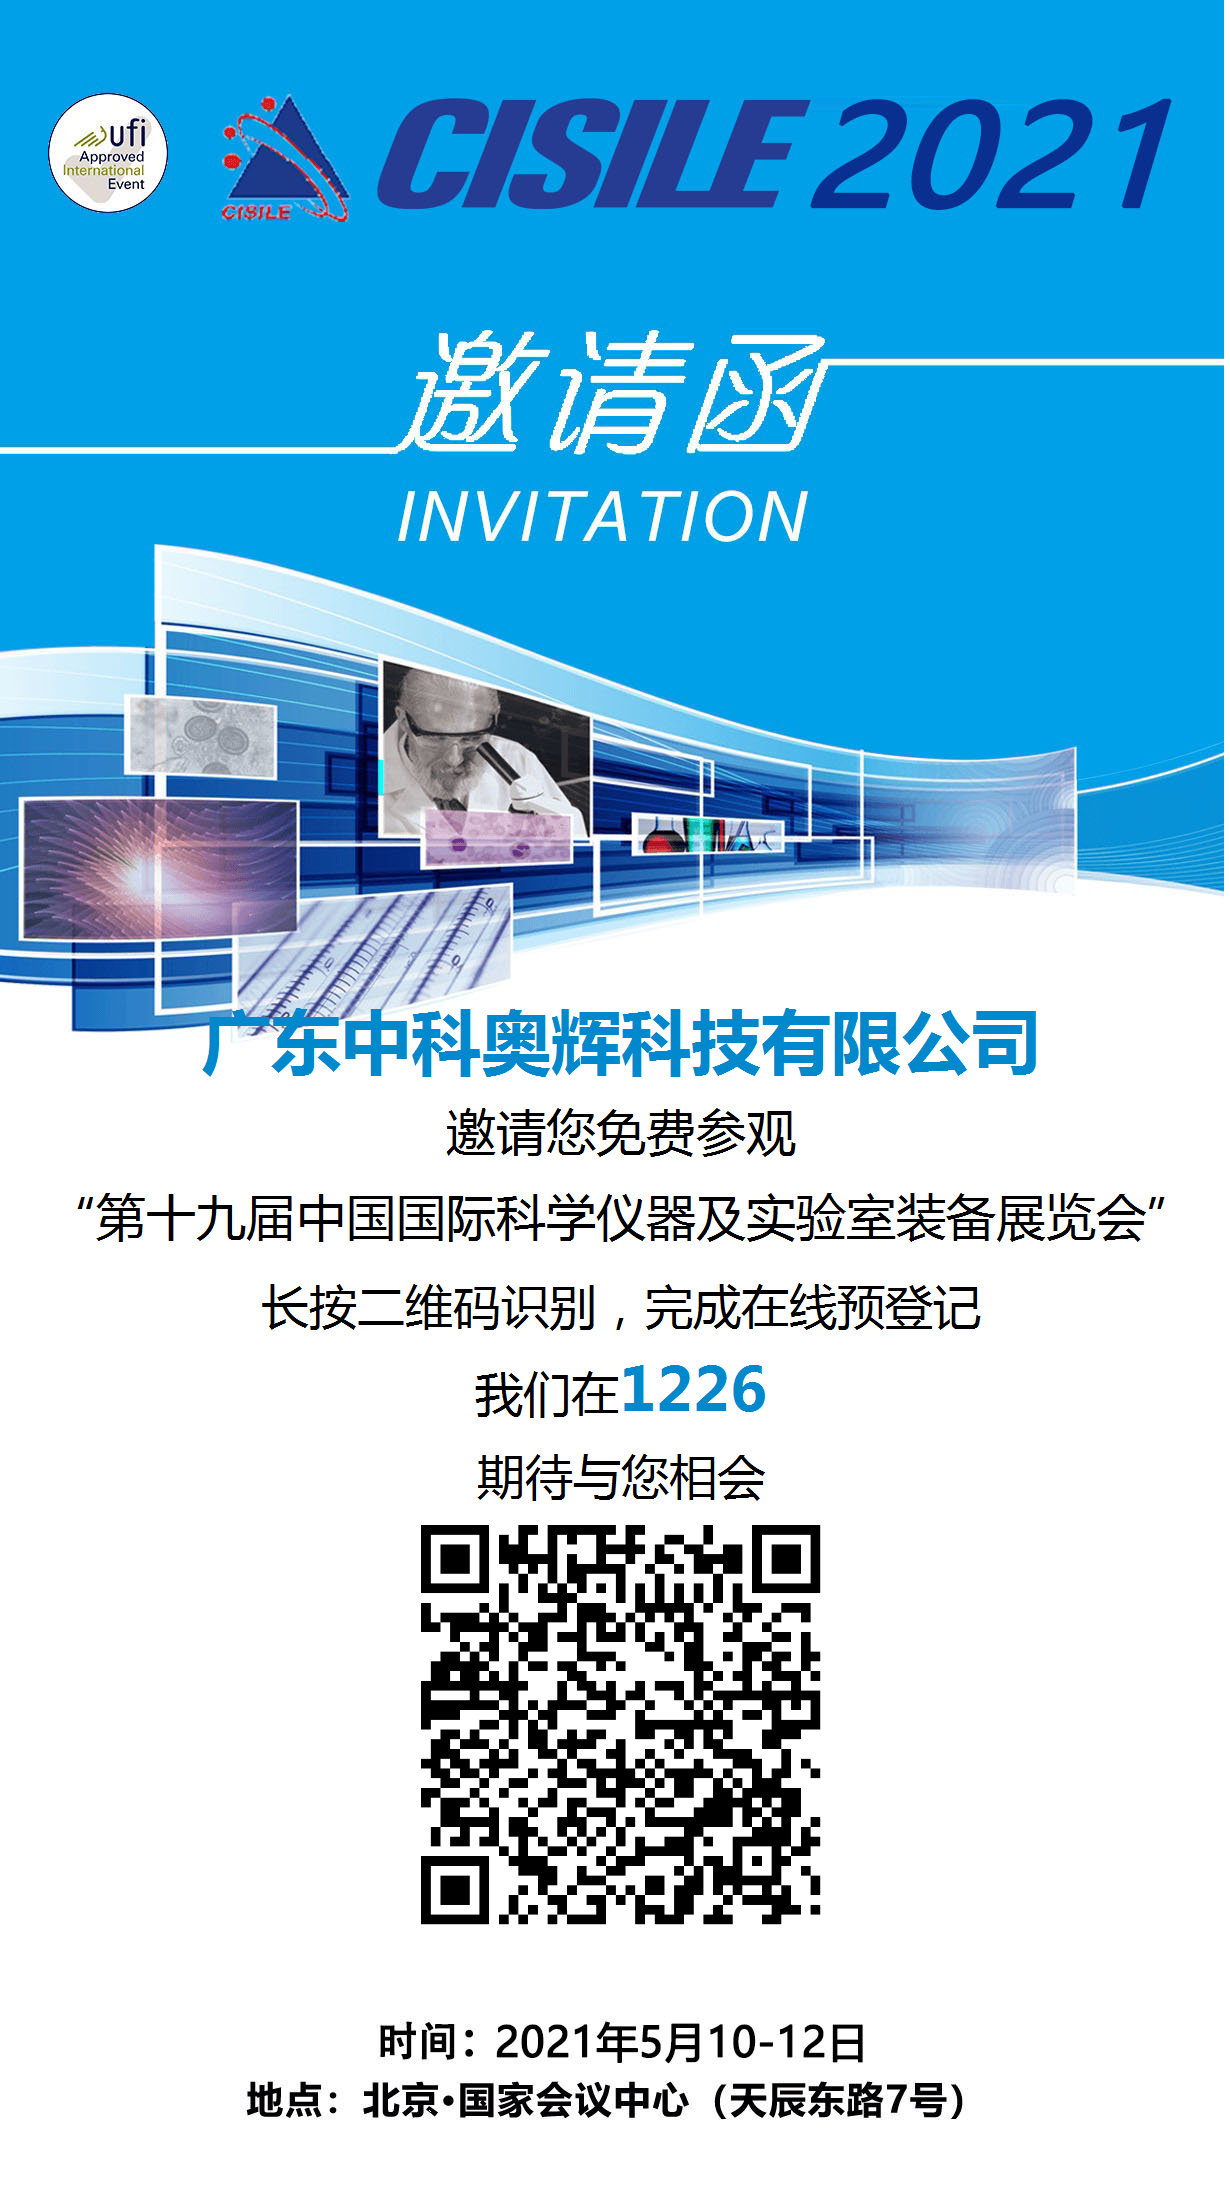 Zhongke Aohui will meet you at the 19th China International Scientific Instruments and Laboratory Equipment Exhibition